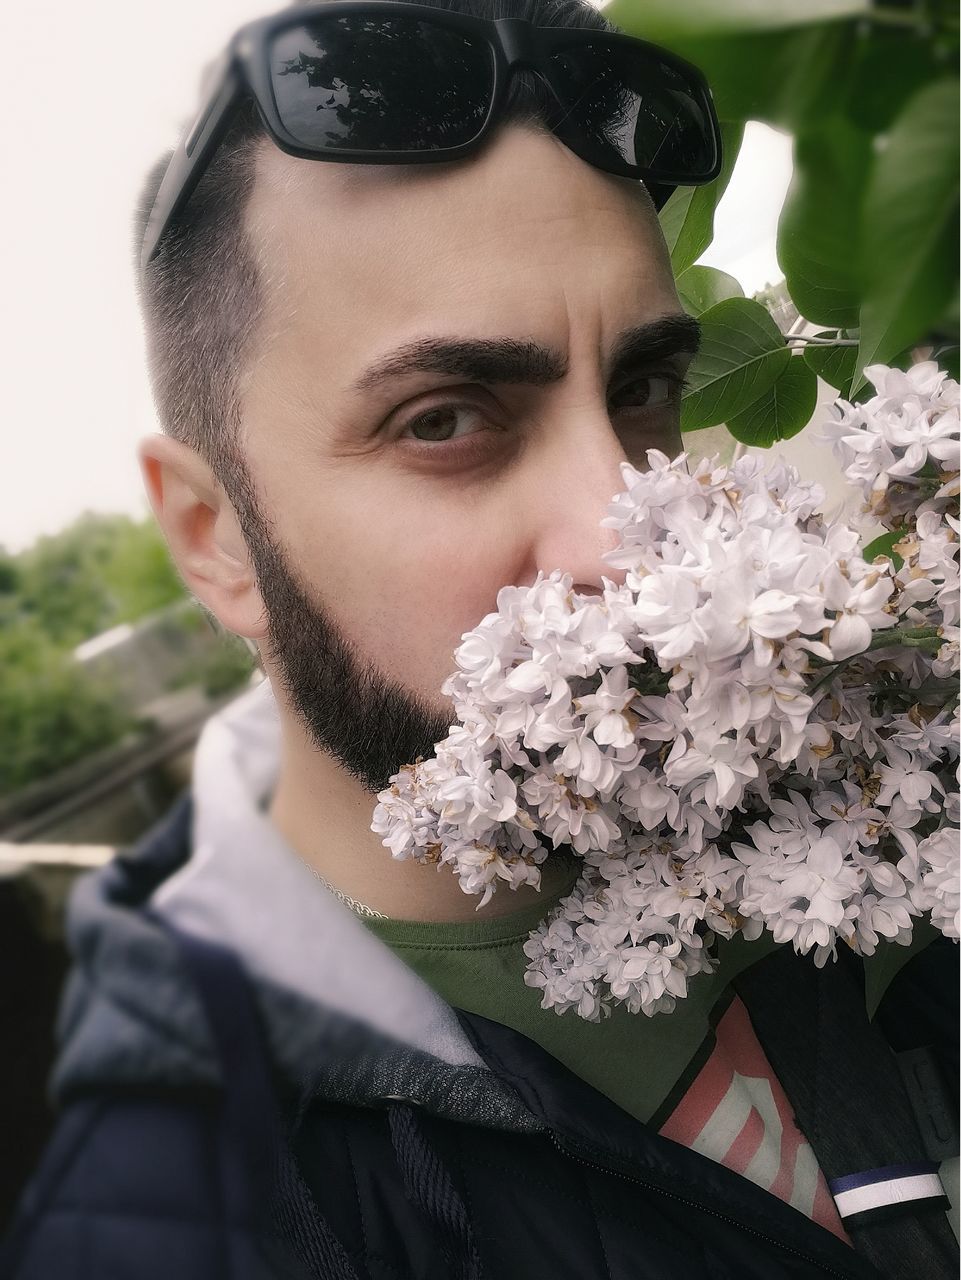 portrait, real people, one person, headshot, plant, leisure activity, young adult, lifestyles, young men, flower, close-up, men, flowering plant, front view, nature, looking at camera, vulnerability, beard, flower head, outdoors, human face